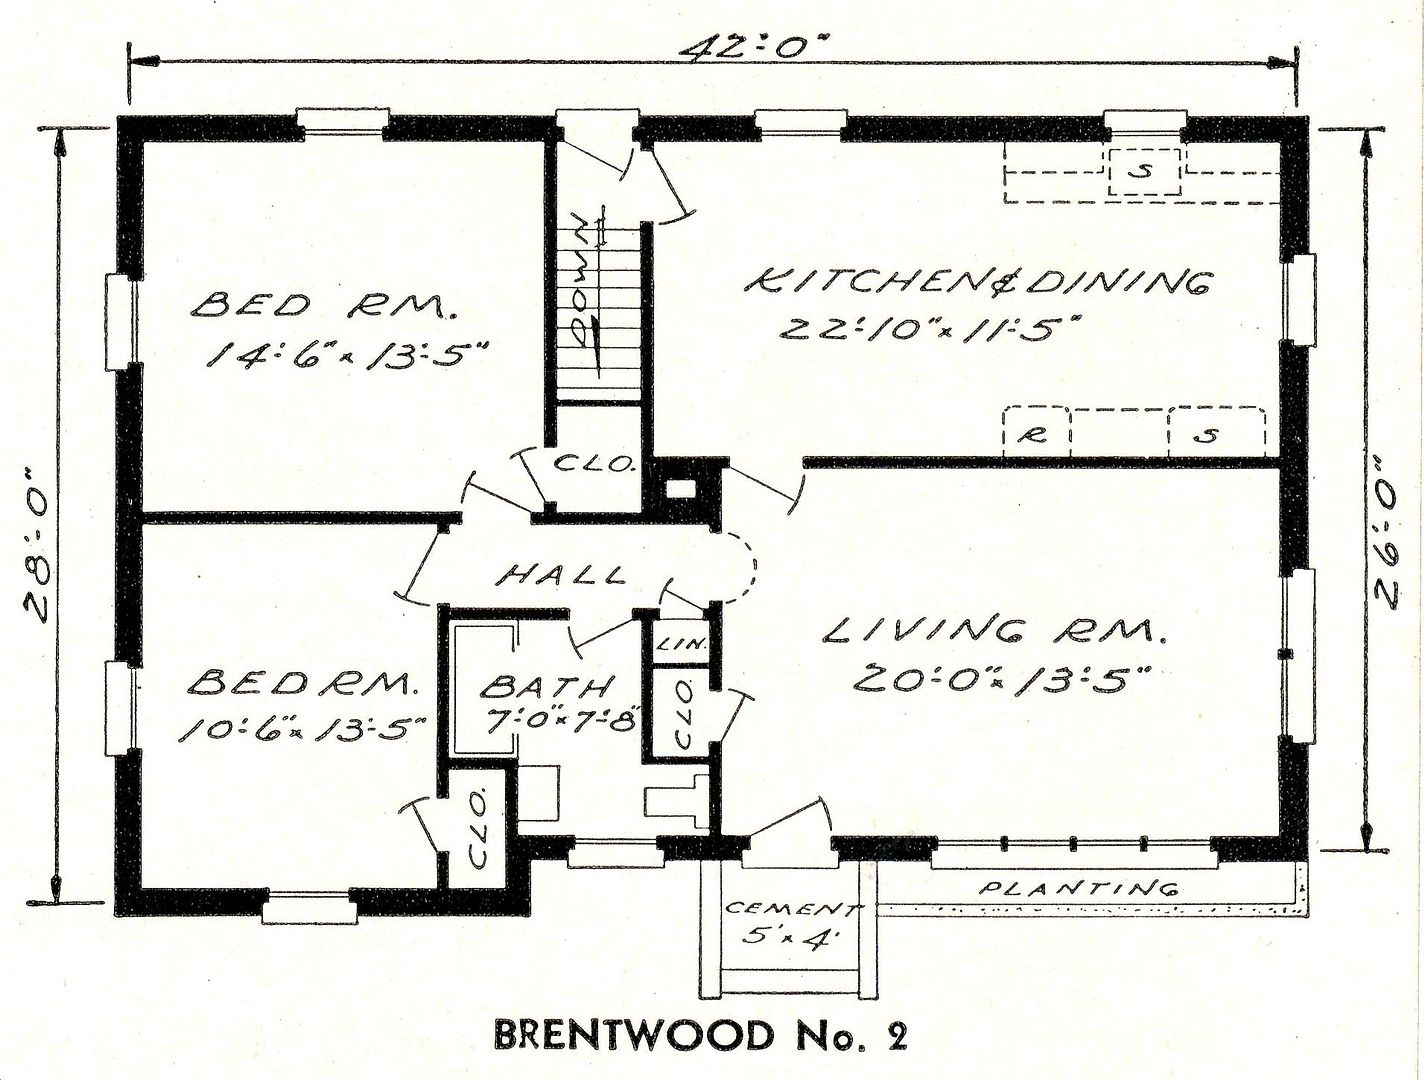 The Brentwood A Home of Impressive Beauty (1952) Sears